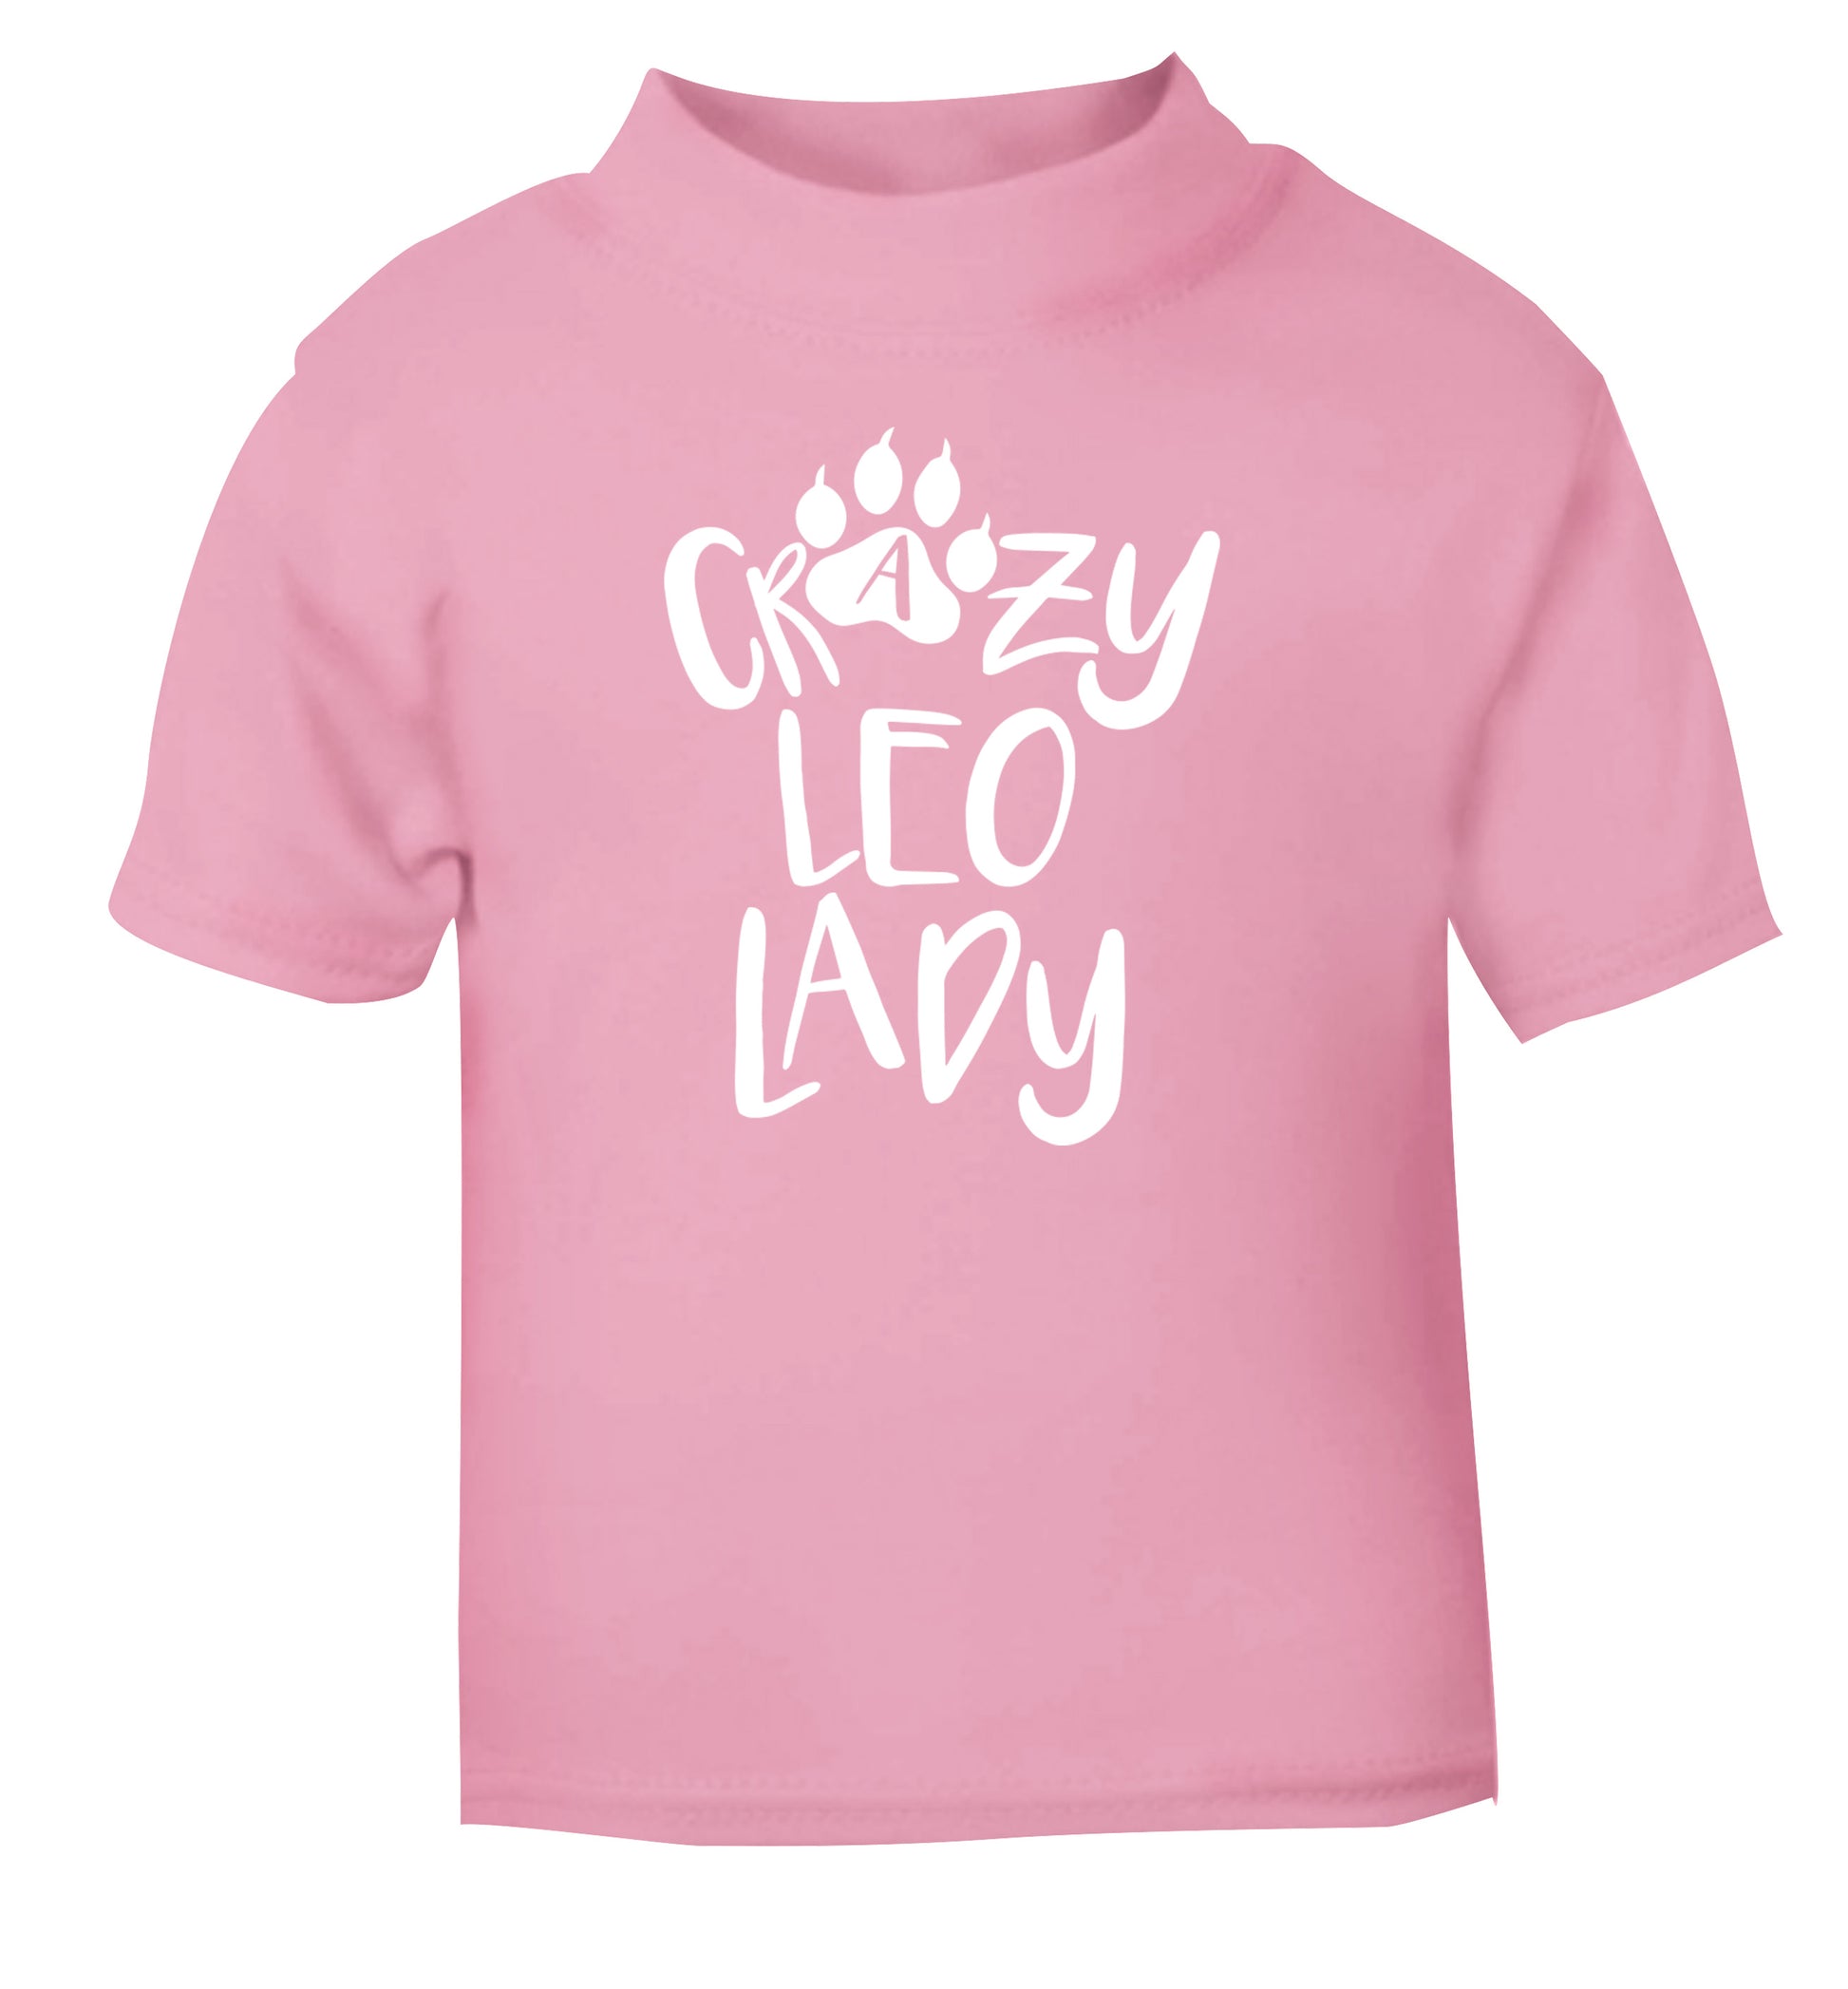 Crazy leo lady light pink Baby Toddler Tshirt 2 Years